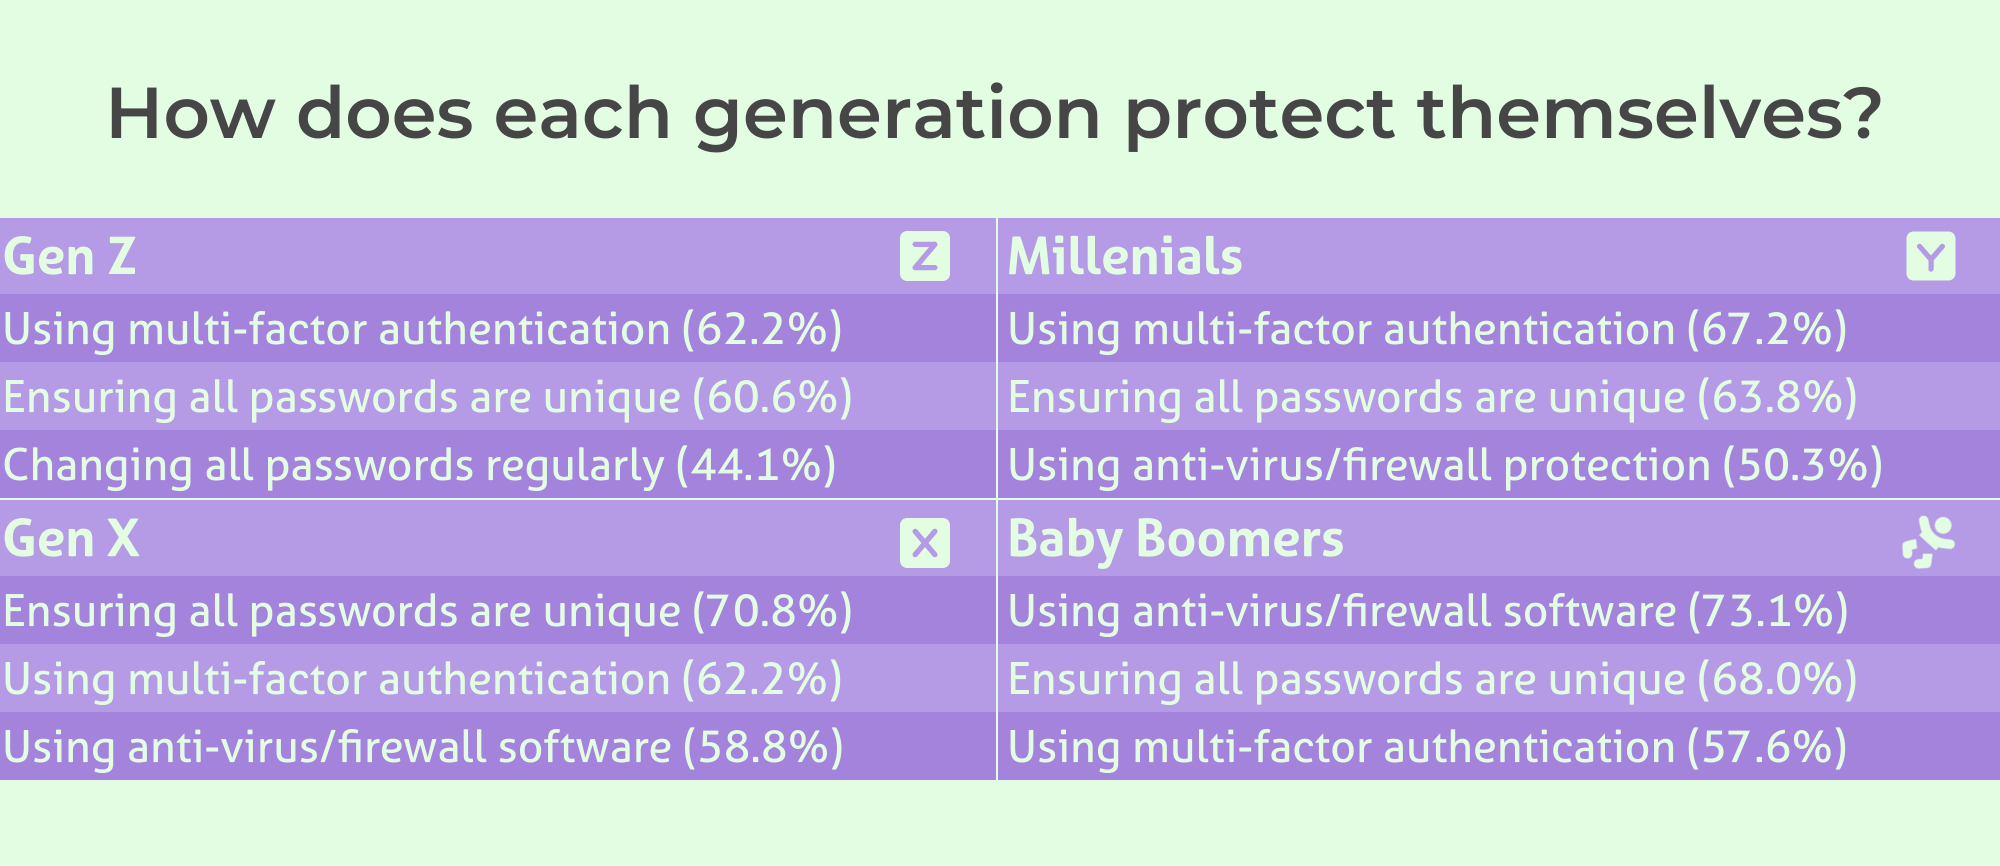 Image showing how different generations in Australia protect themselves when it comes to online security.